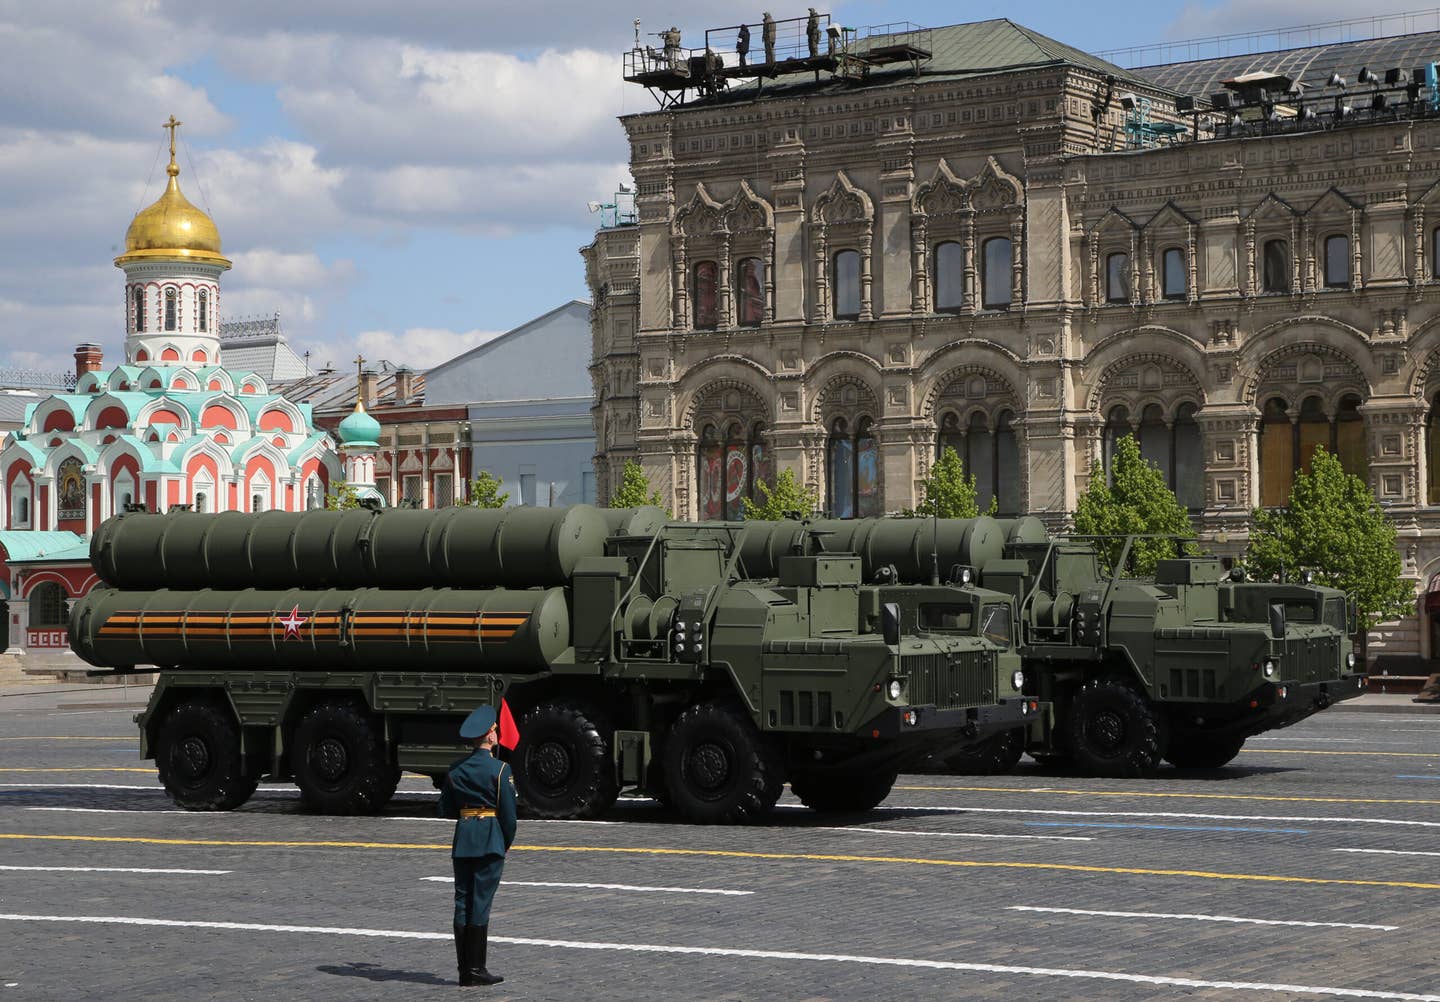 S-400 air defense missile systems (NATO reporting name SA-21 Growler) during the Victory Day parade in Red Square. <em>Photo by Contributor/Getty Images</em>